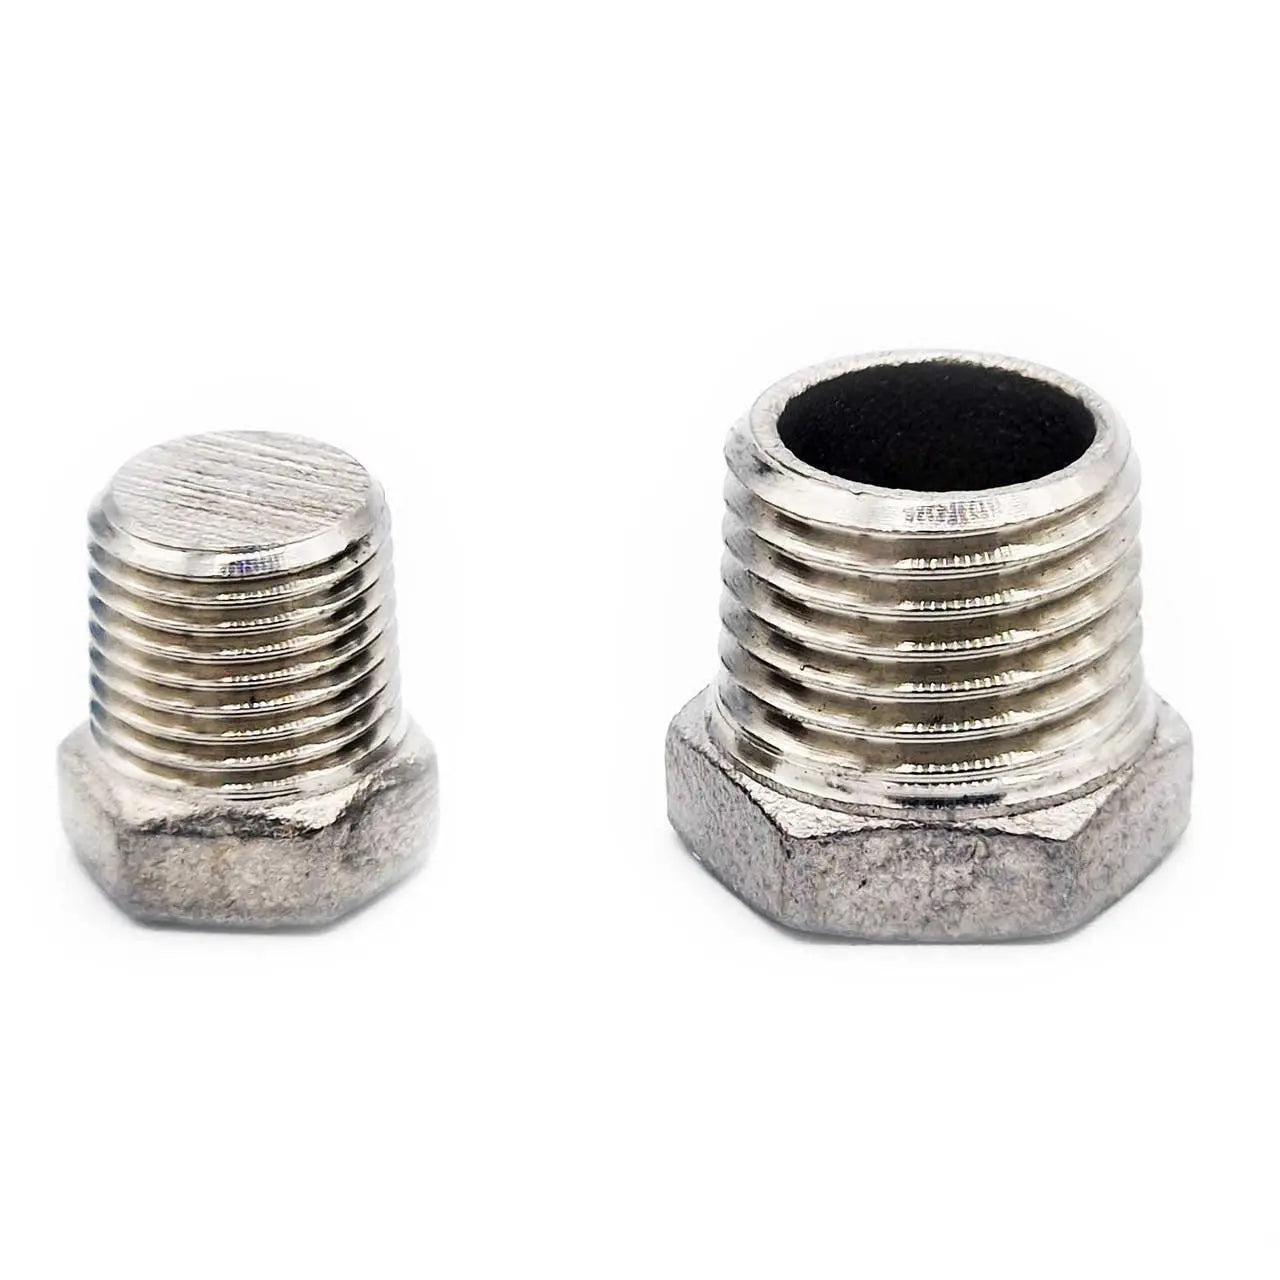 1/8 1/4 BSP Male Hex Plug 316 Stainless Steel Blanking Plugs and Caps